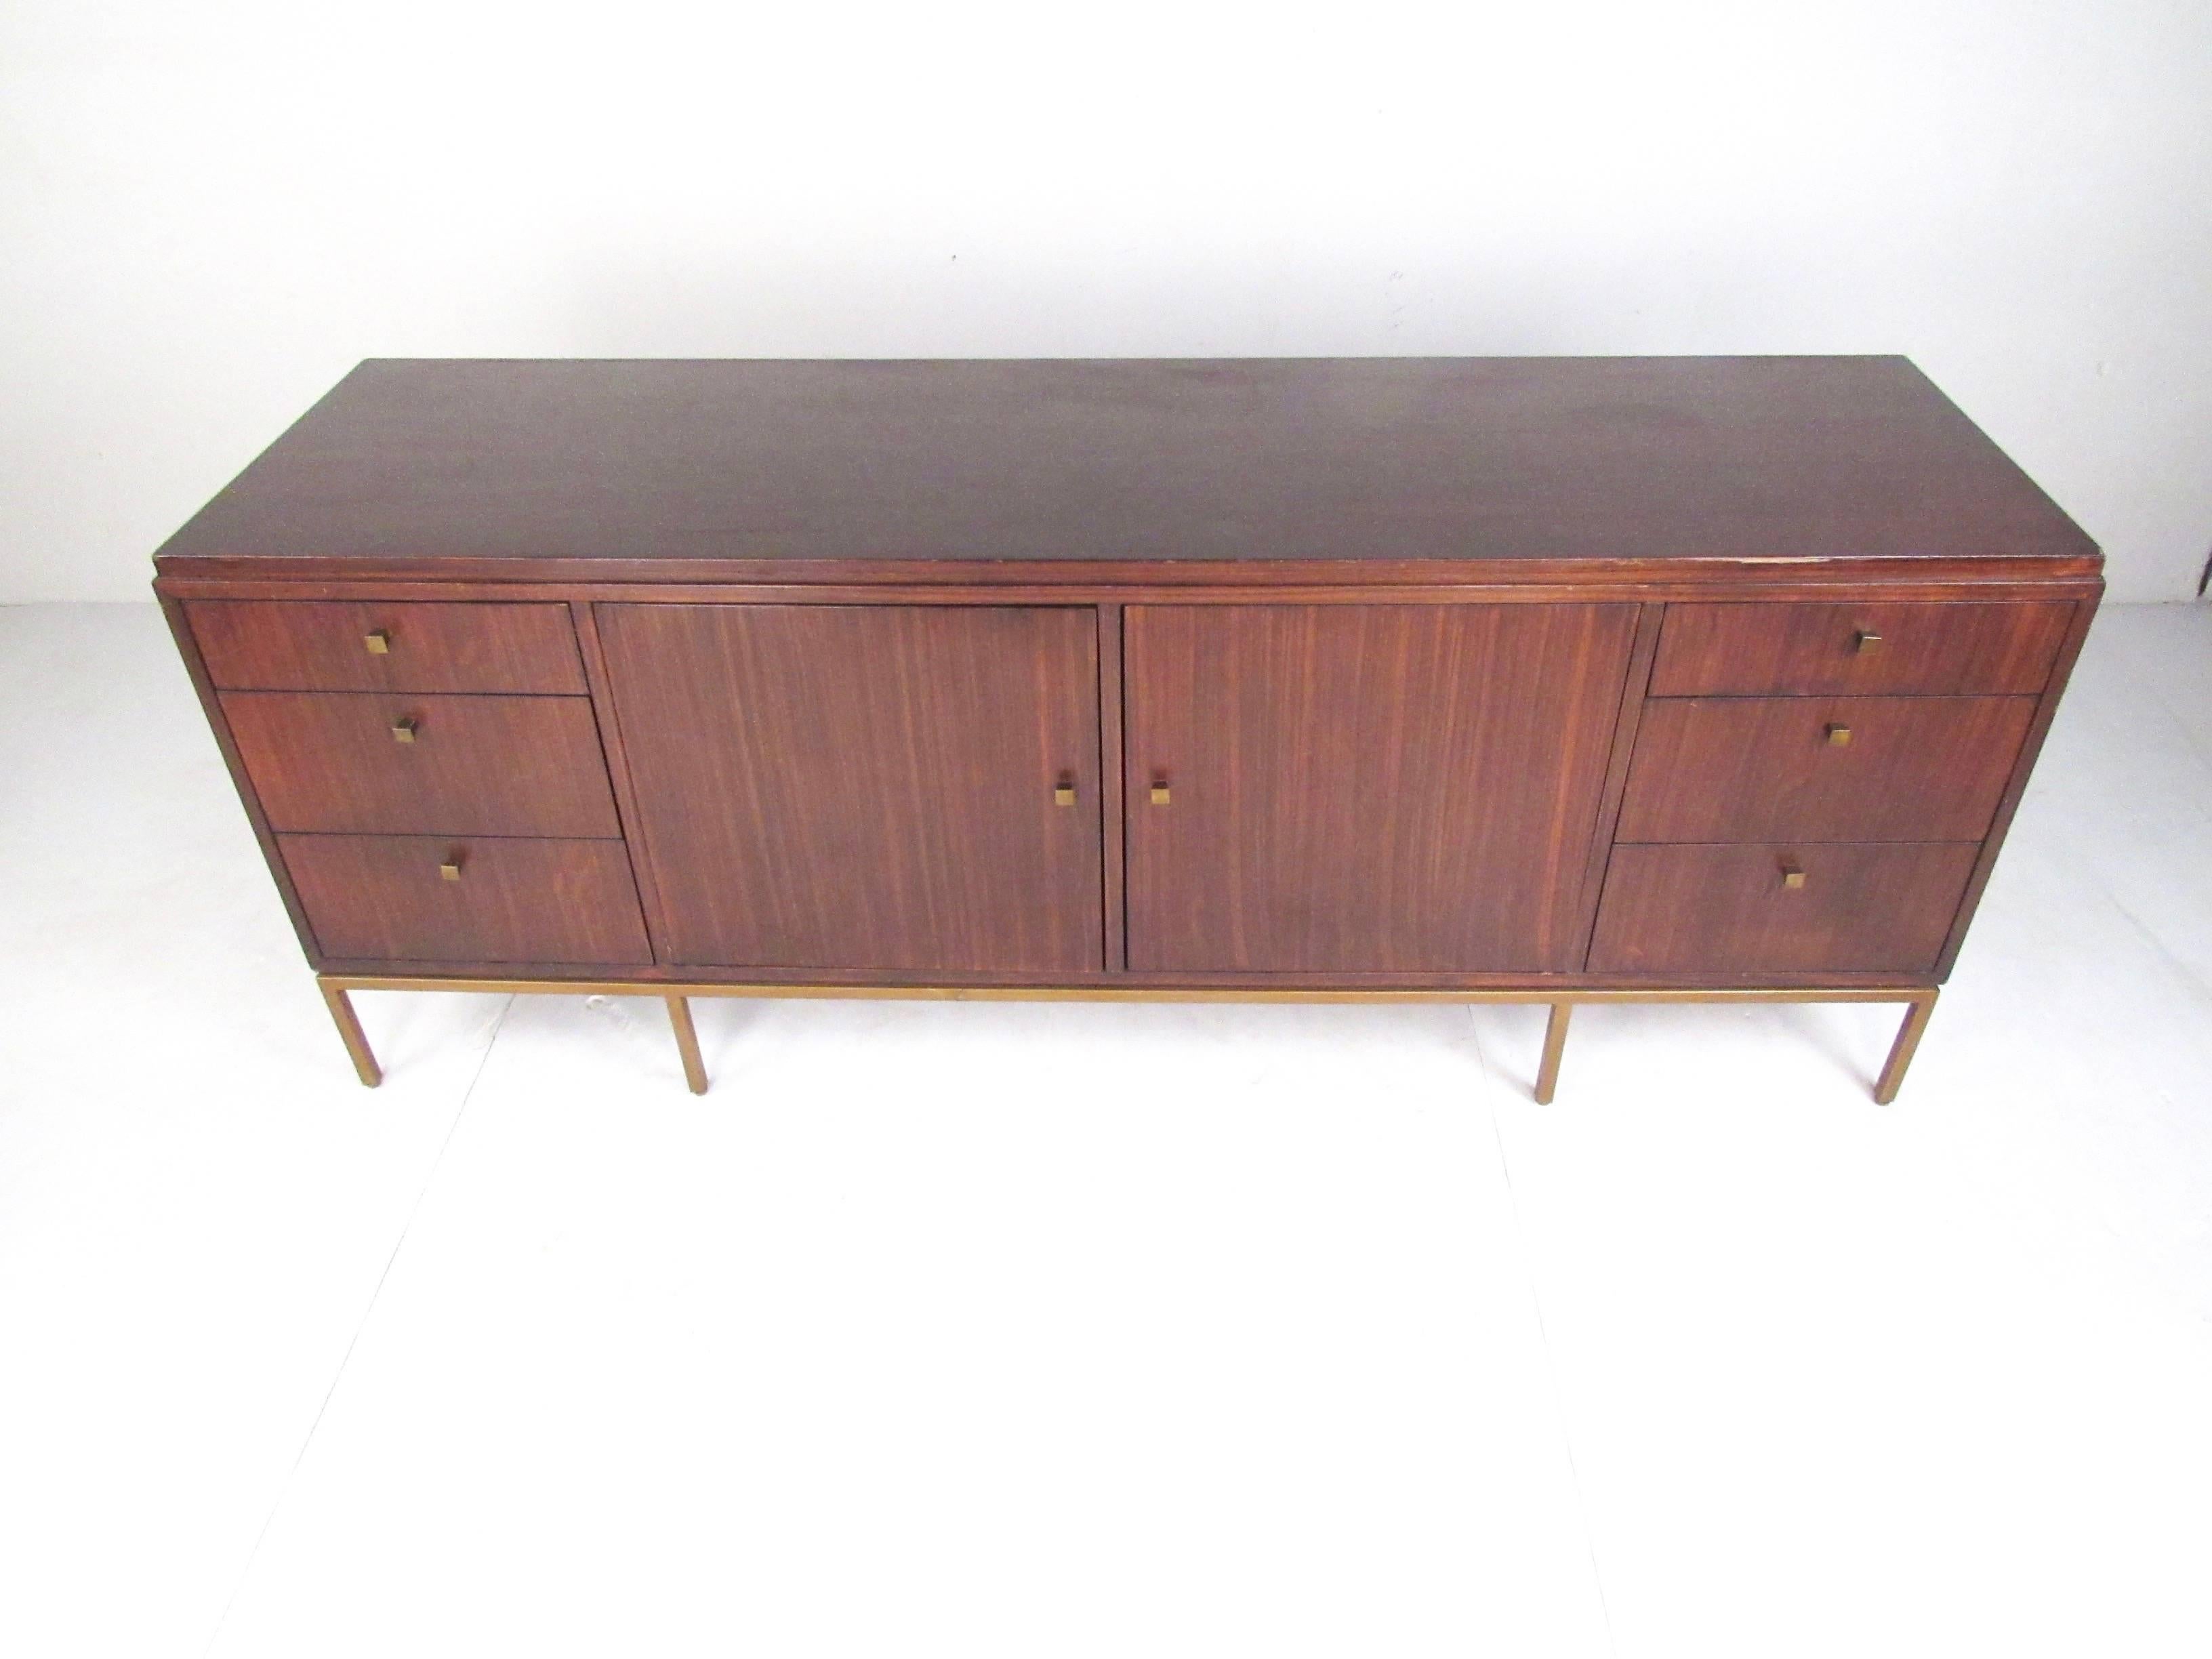 Beautiful Mid-Century Modern style sideboard features plenty of room for storage within its six large drawers and four shelves hidden behind two cabinet doors. Sleek design with unique brass pulls and a solid brass base with eight legs. Sturdy